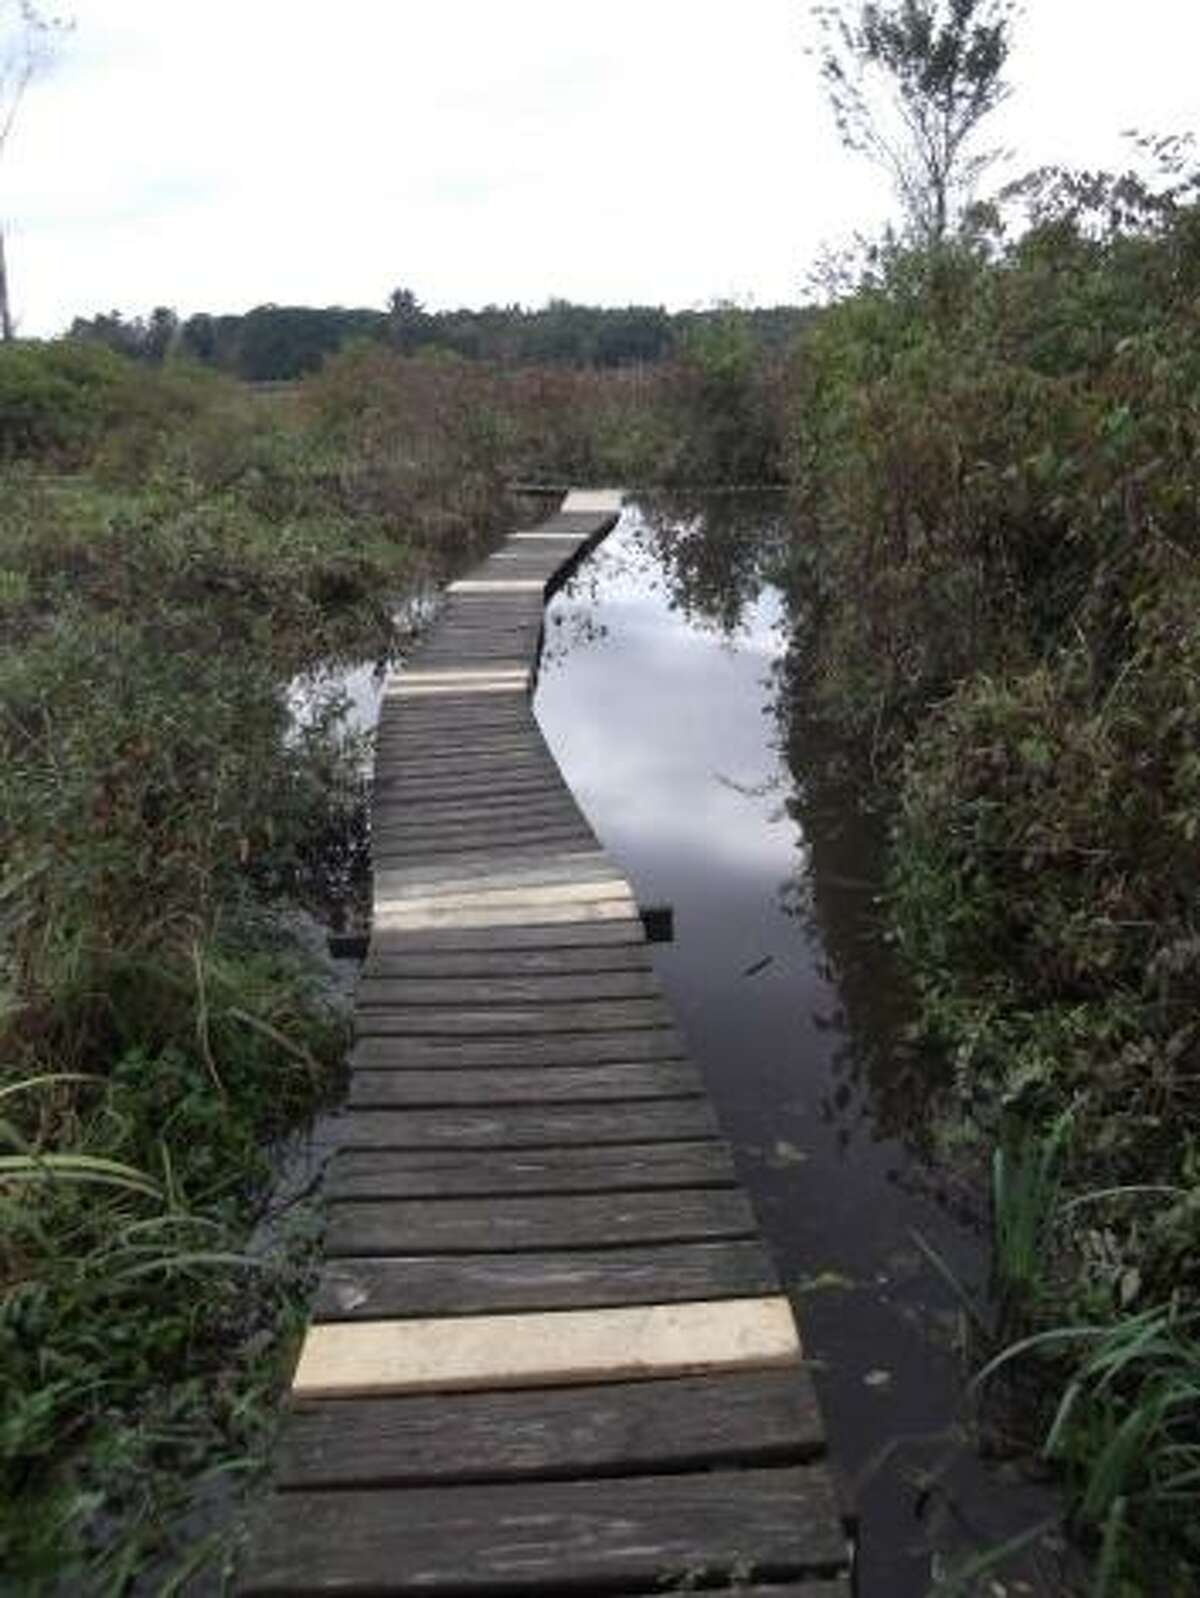 By KAITLYN YEAGER White Memorial Foundation's boardwalk, which leads hikers through its popular Little Pond area, is partially repaired.